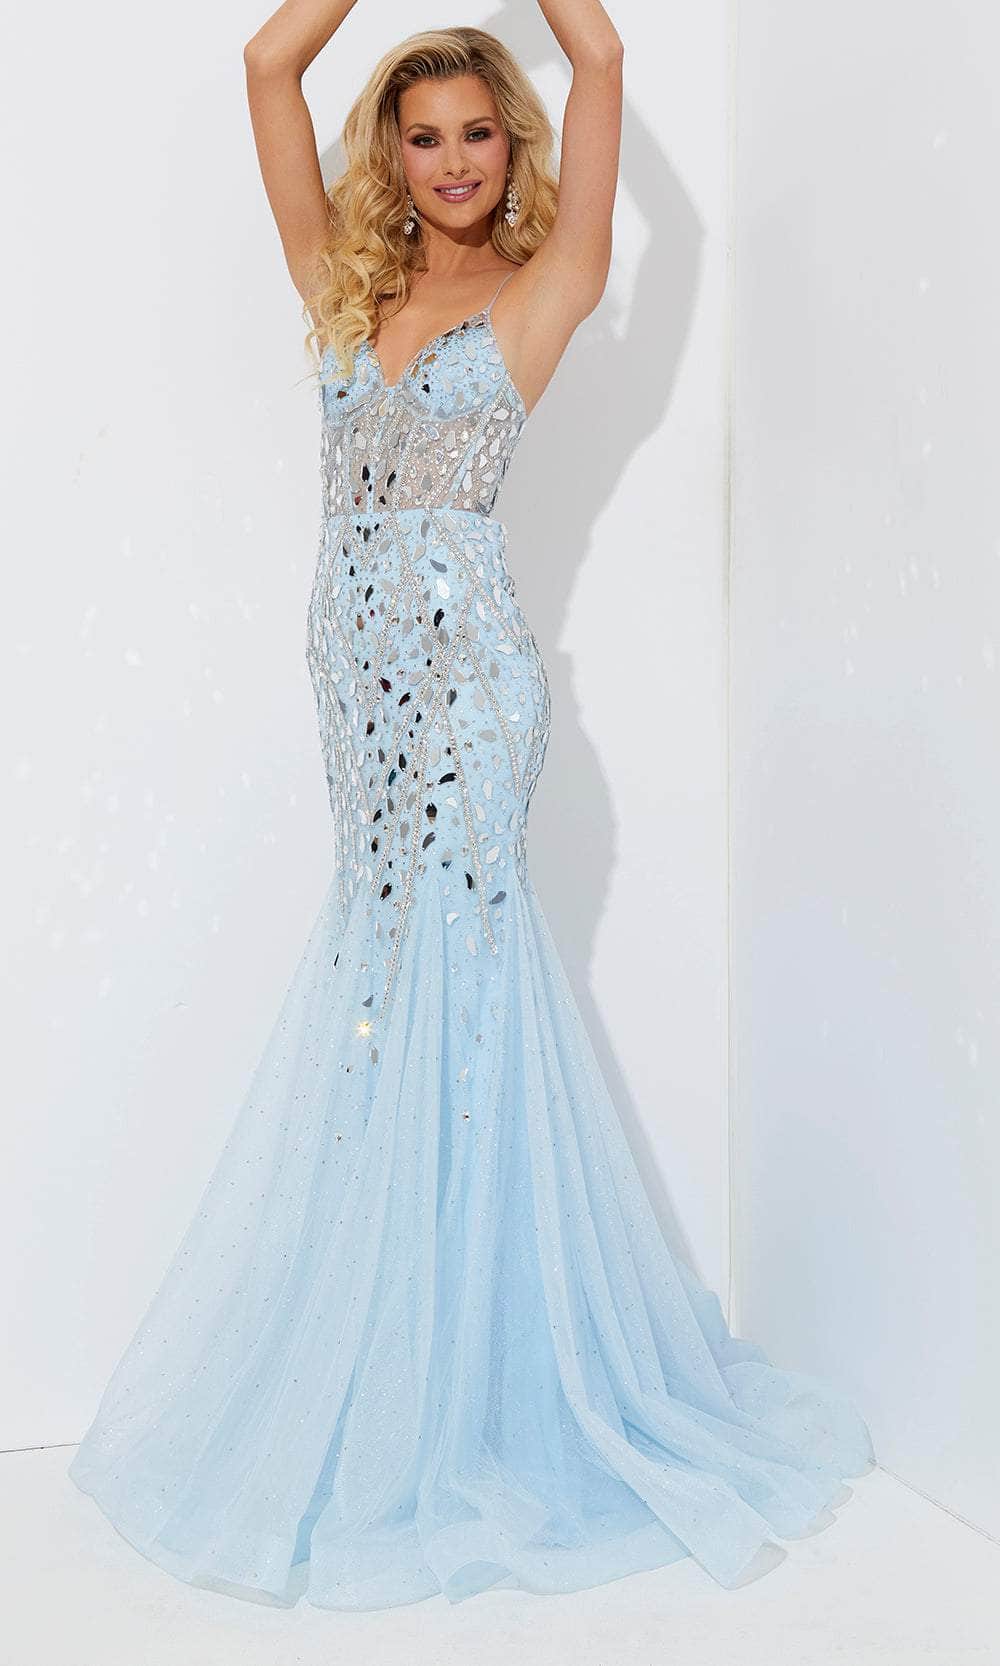 Image of Jasz Couture 7573 - Cut Glass Corset Prom Dress